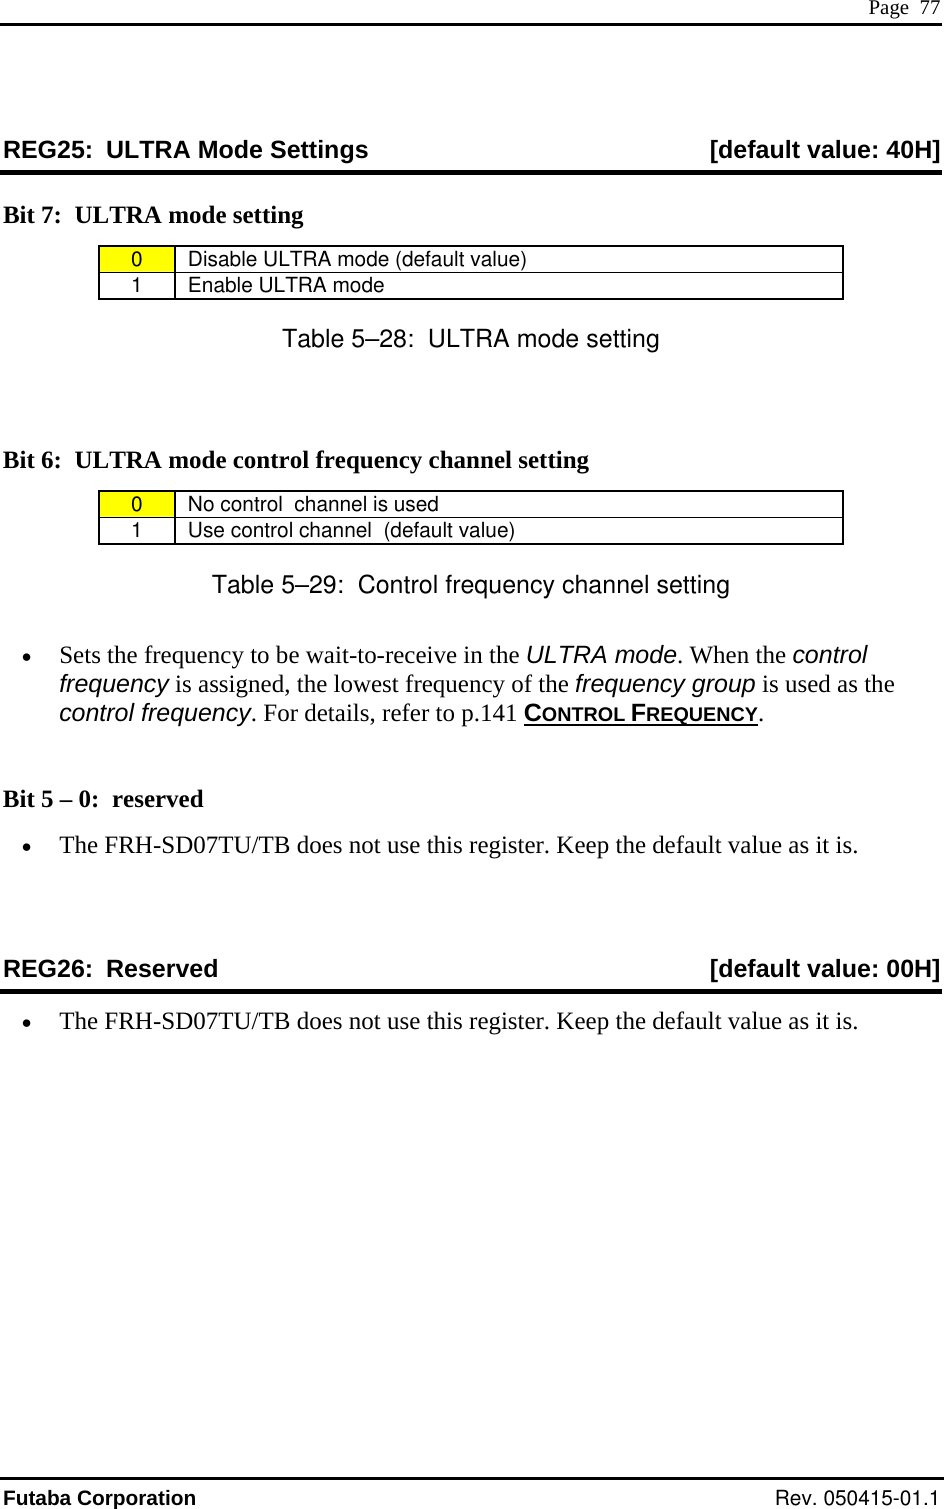  Page  77 REG25:  ULTRA Mode Settings  [default value: 40H] Bit 7:  ULTRA mode setting 0  Disable ULTRA mode (default value) 1 Enable ULTRA mode Table 5–28:  ULTRA mode setting  Bit 6:  ULTRA mode control frequency channel setting 0  No control  channel is used 1  Use control channel  (default value) Table 5–29:  Control frequency channel setting LTRA mode. When the control frequency is assigned, the lowest frequency of the frequency group is used as the contro eq•  Sets the frequency to be wait-to-receive in the Ul fr uency. For details, refer to p.141 CONTROL FREQUENCY.  Bit 5 – 0:  re•  The FRH-SD07TU/TB does not use this register. Keep the default value as it is.   [default value: 00H] served  REG26:  Reserved•  The FRH-SD07TU/TB does not use this register. Keep the default value as it is. Futaba Corporation Rev. 050415-01.1 